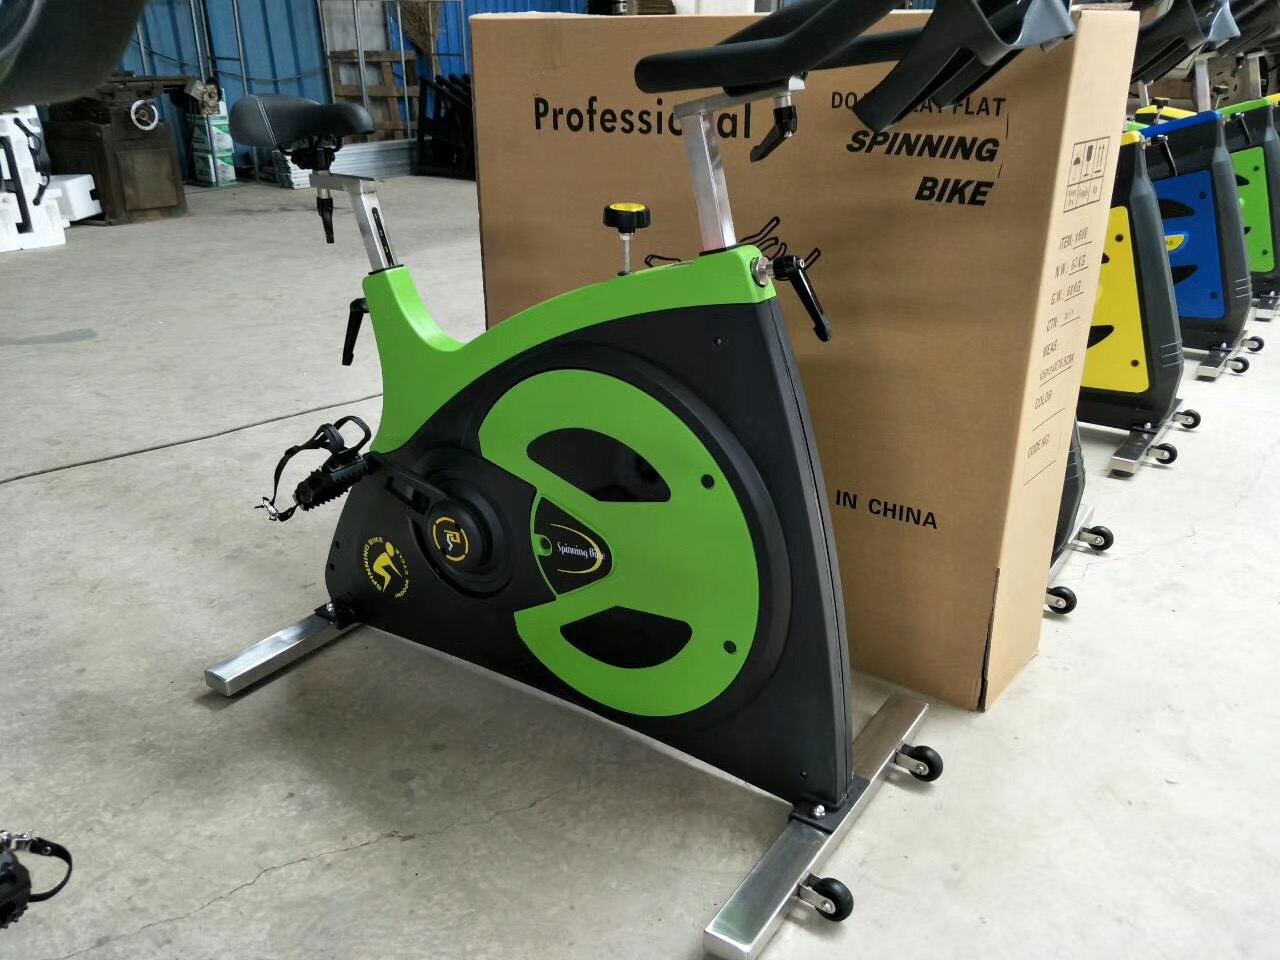 Commercial Gym  Fitness Exercise  Bike in Gym Equipment